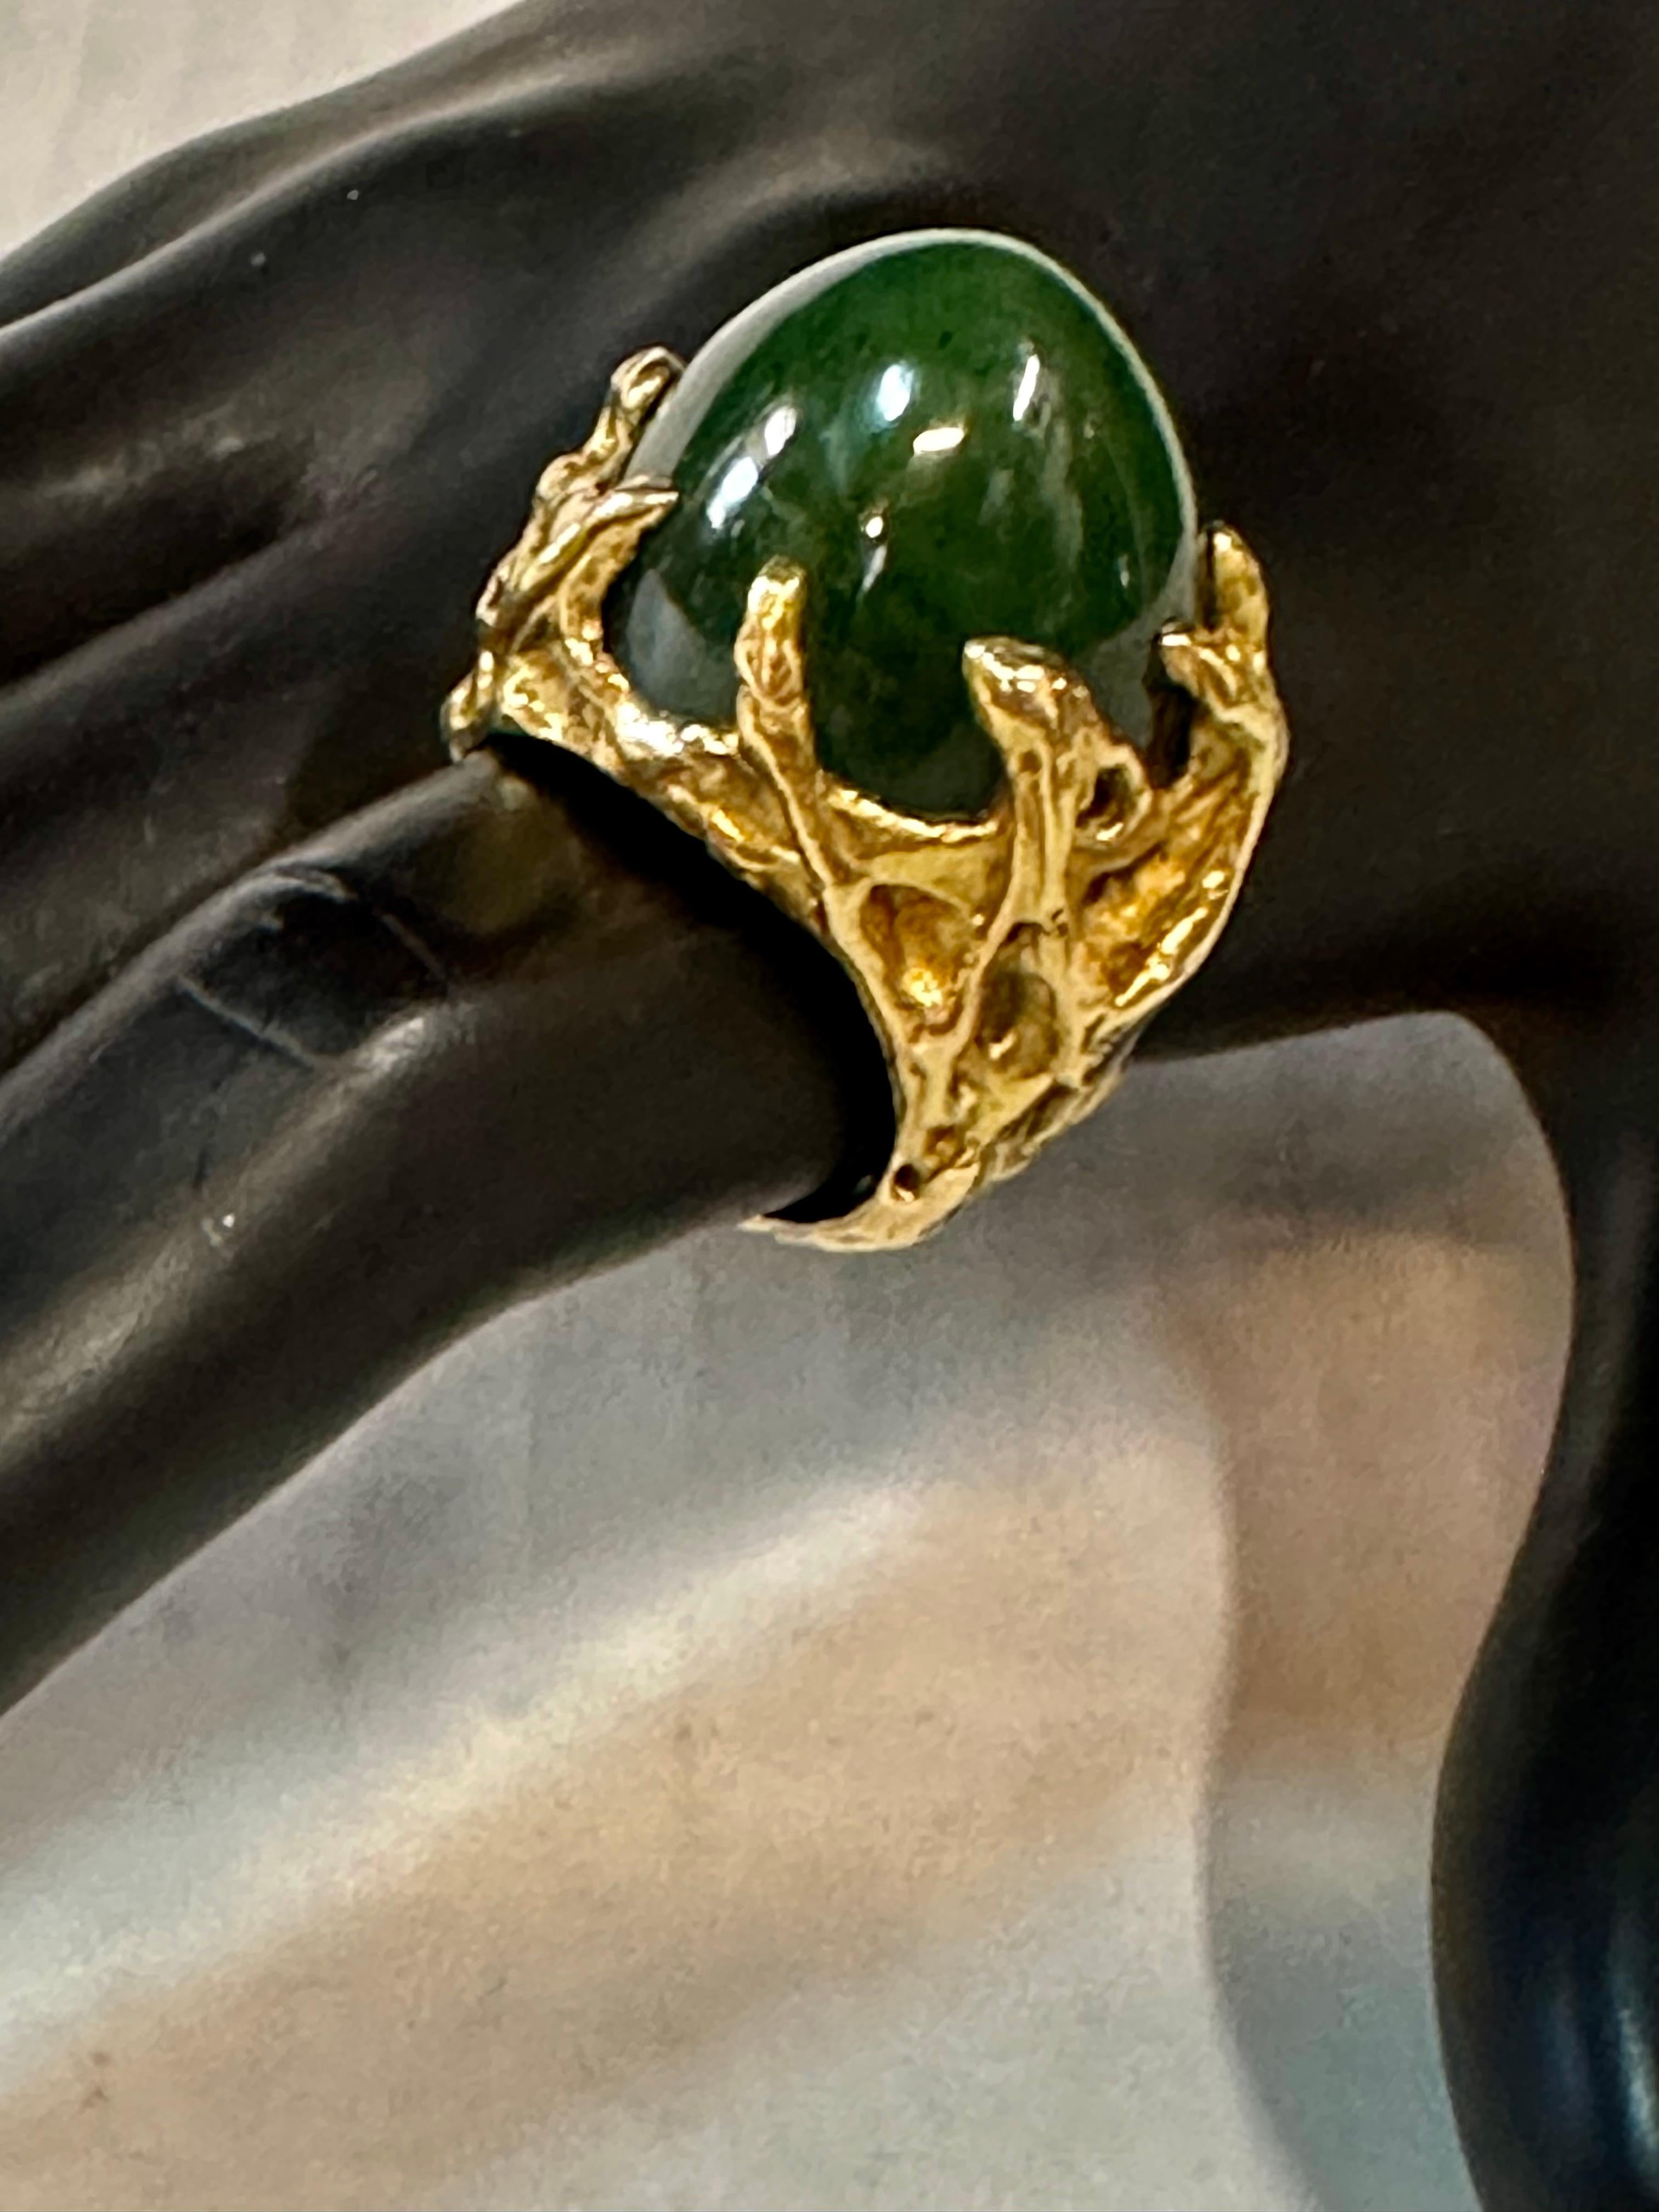 This impressive 18K gold & jade ring was designed & custom made by Merrin jewelers of New York in the 1960’s. It features a spectacular sculpted setting with a huge solid domed dark green jade. The thick textured heavy gold shank is artistically